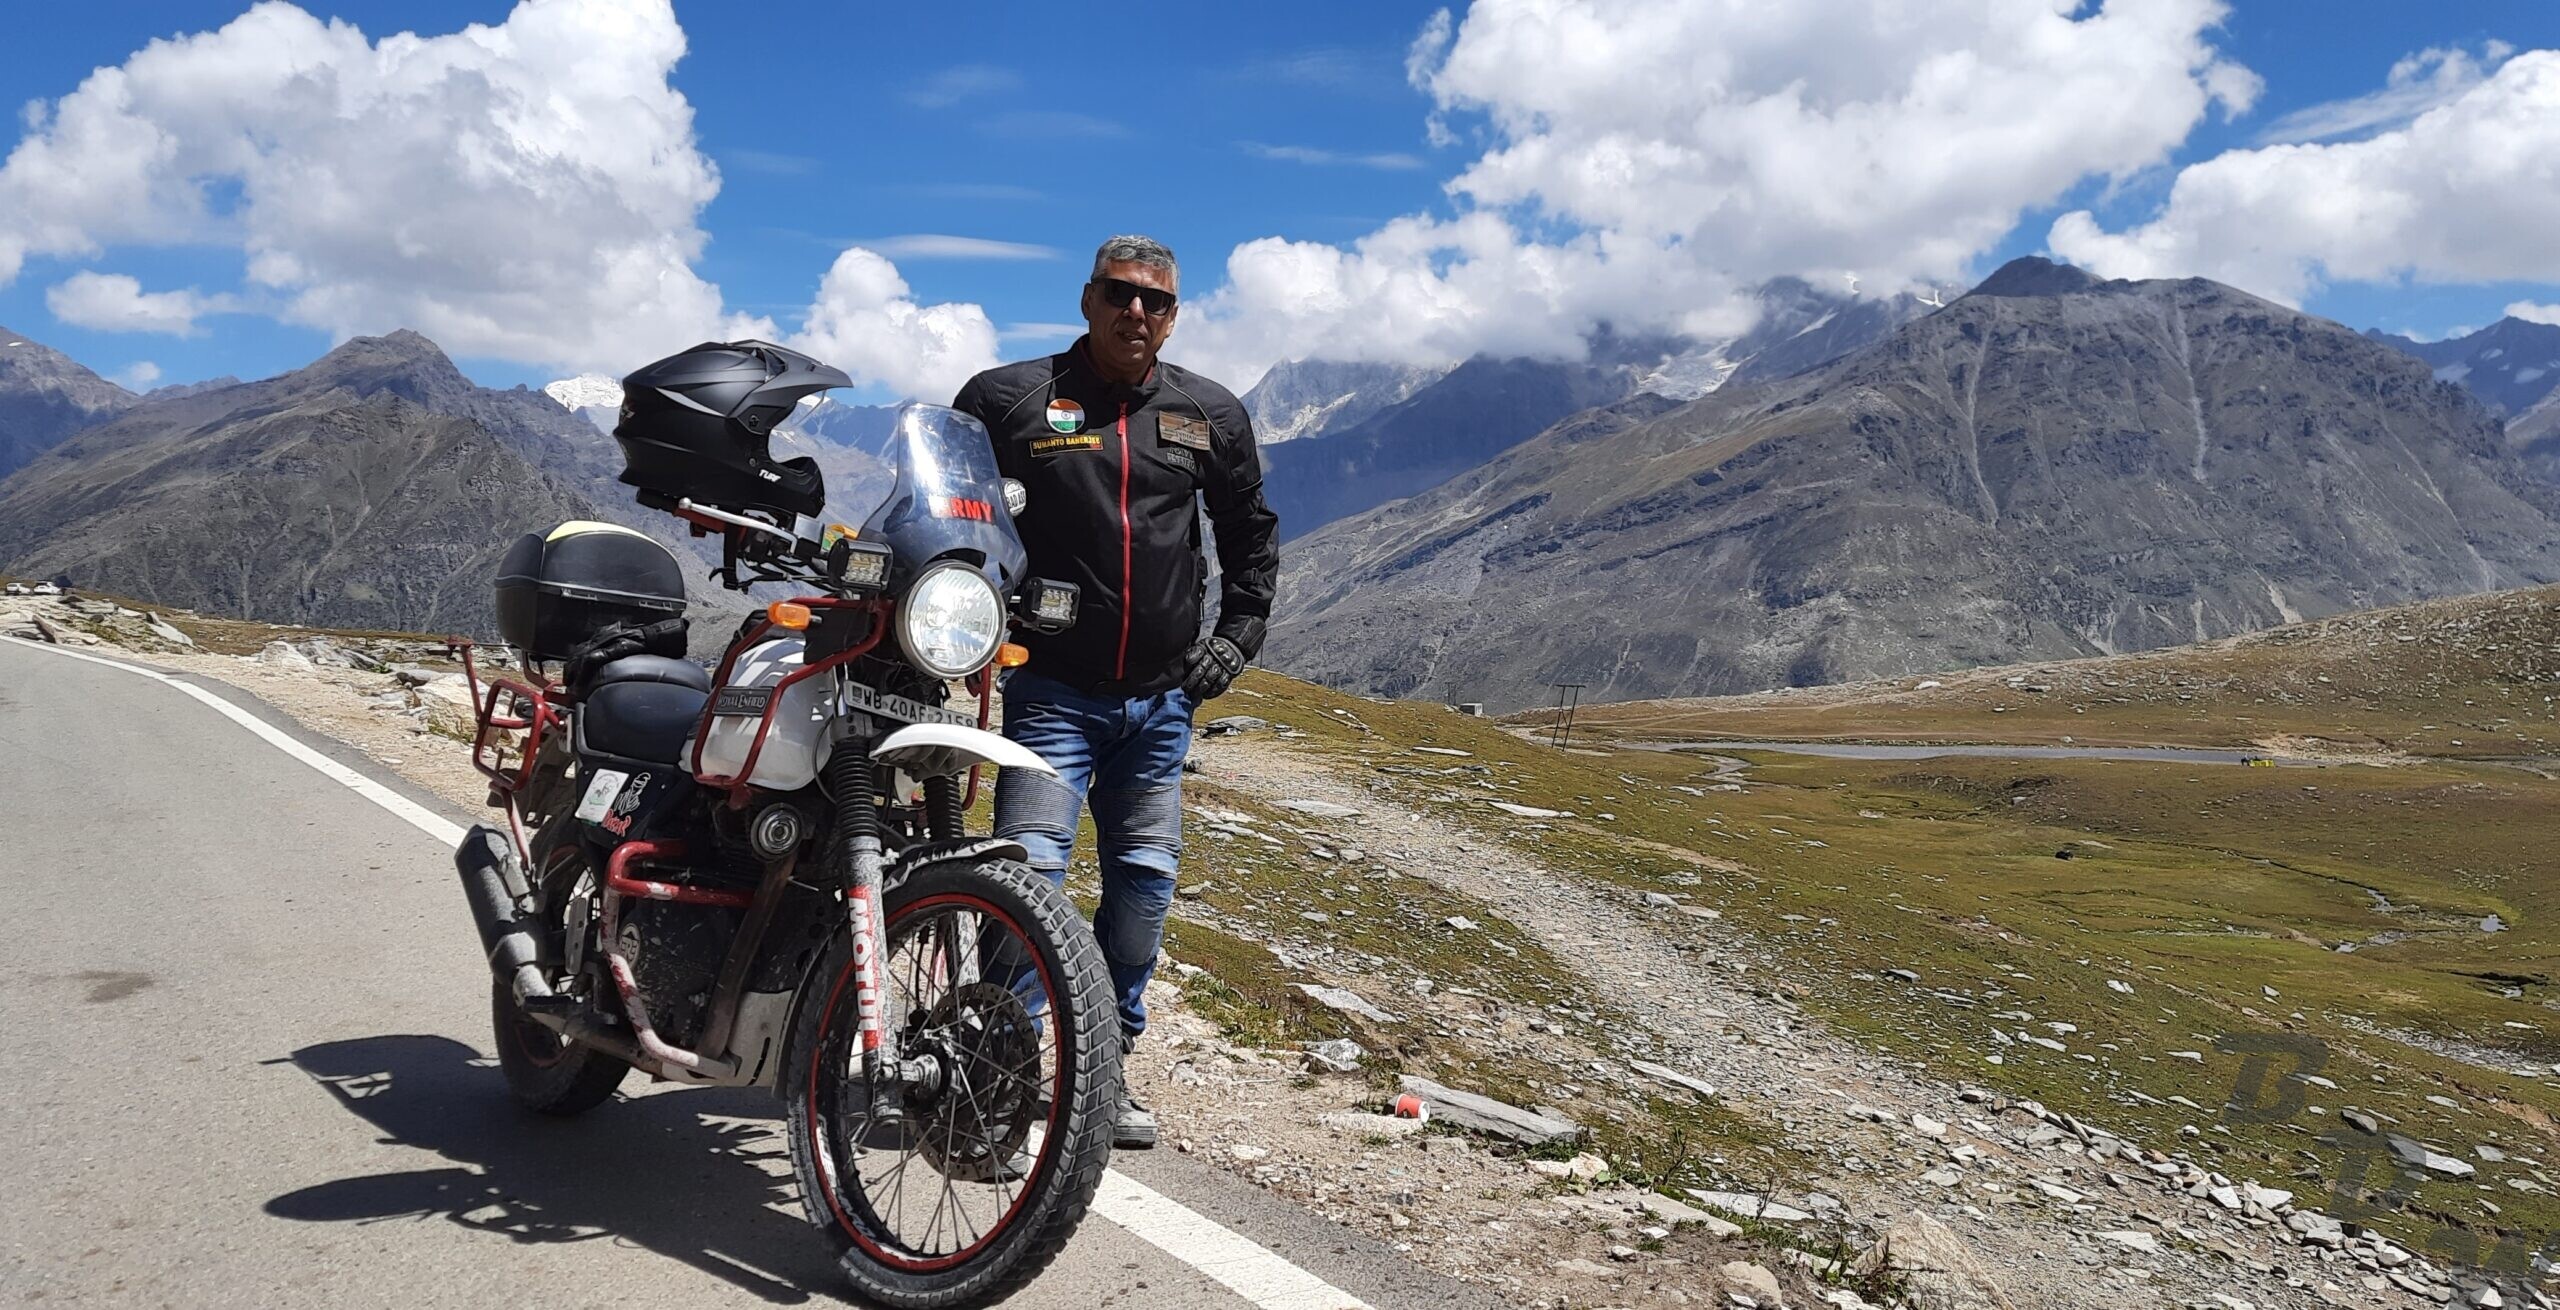 Rohtang: Soloride To An Old Friend